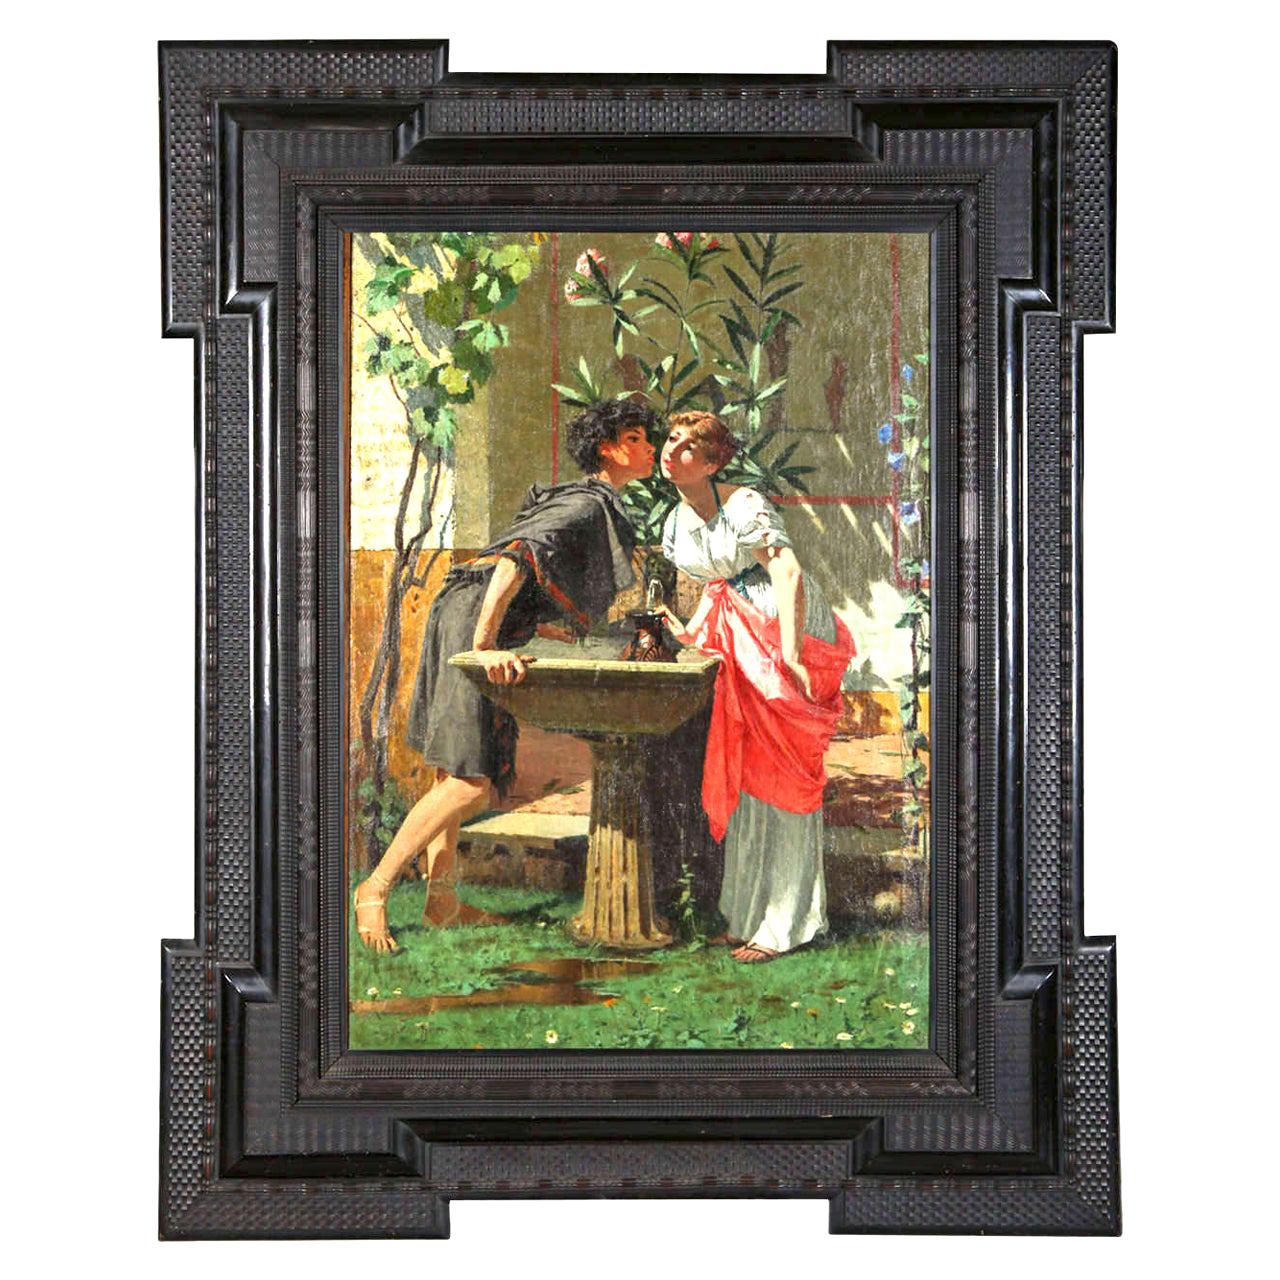 Lovers by a Fountain 19th Century Painting Oil on Canvas, Modesto Faustini, 1860 For Sale